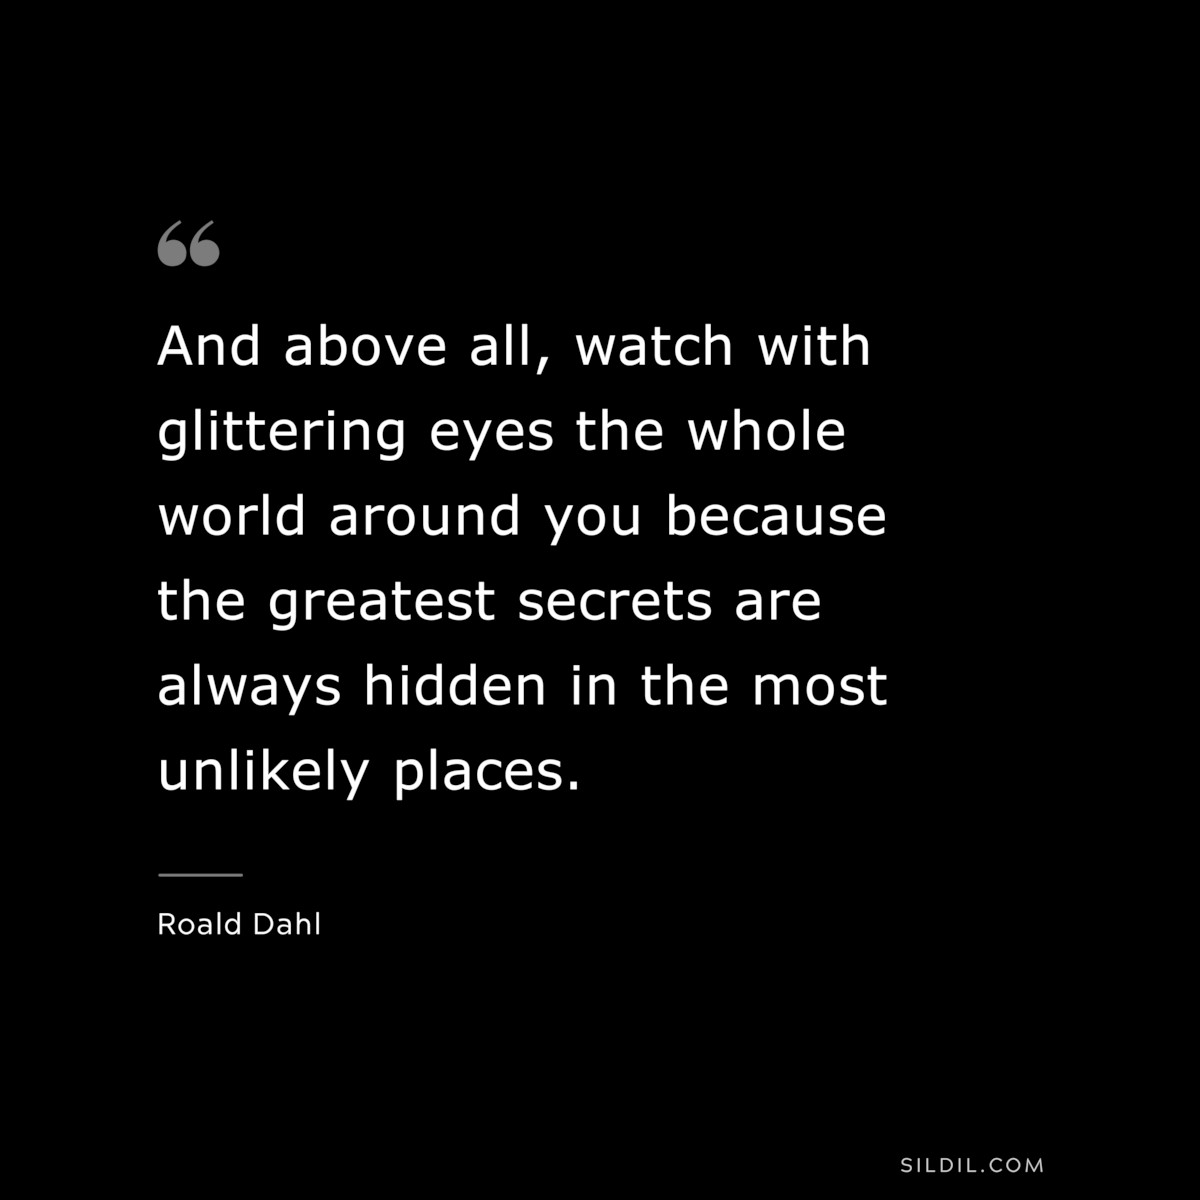 And above all, watch with glittering eyes the whole world around you because the greatest secrets are always hidden in the most unlikely places. ― Roald Dahl